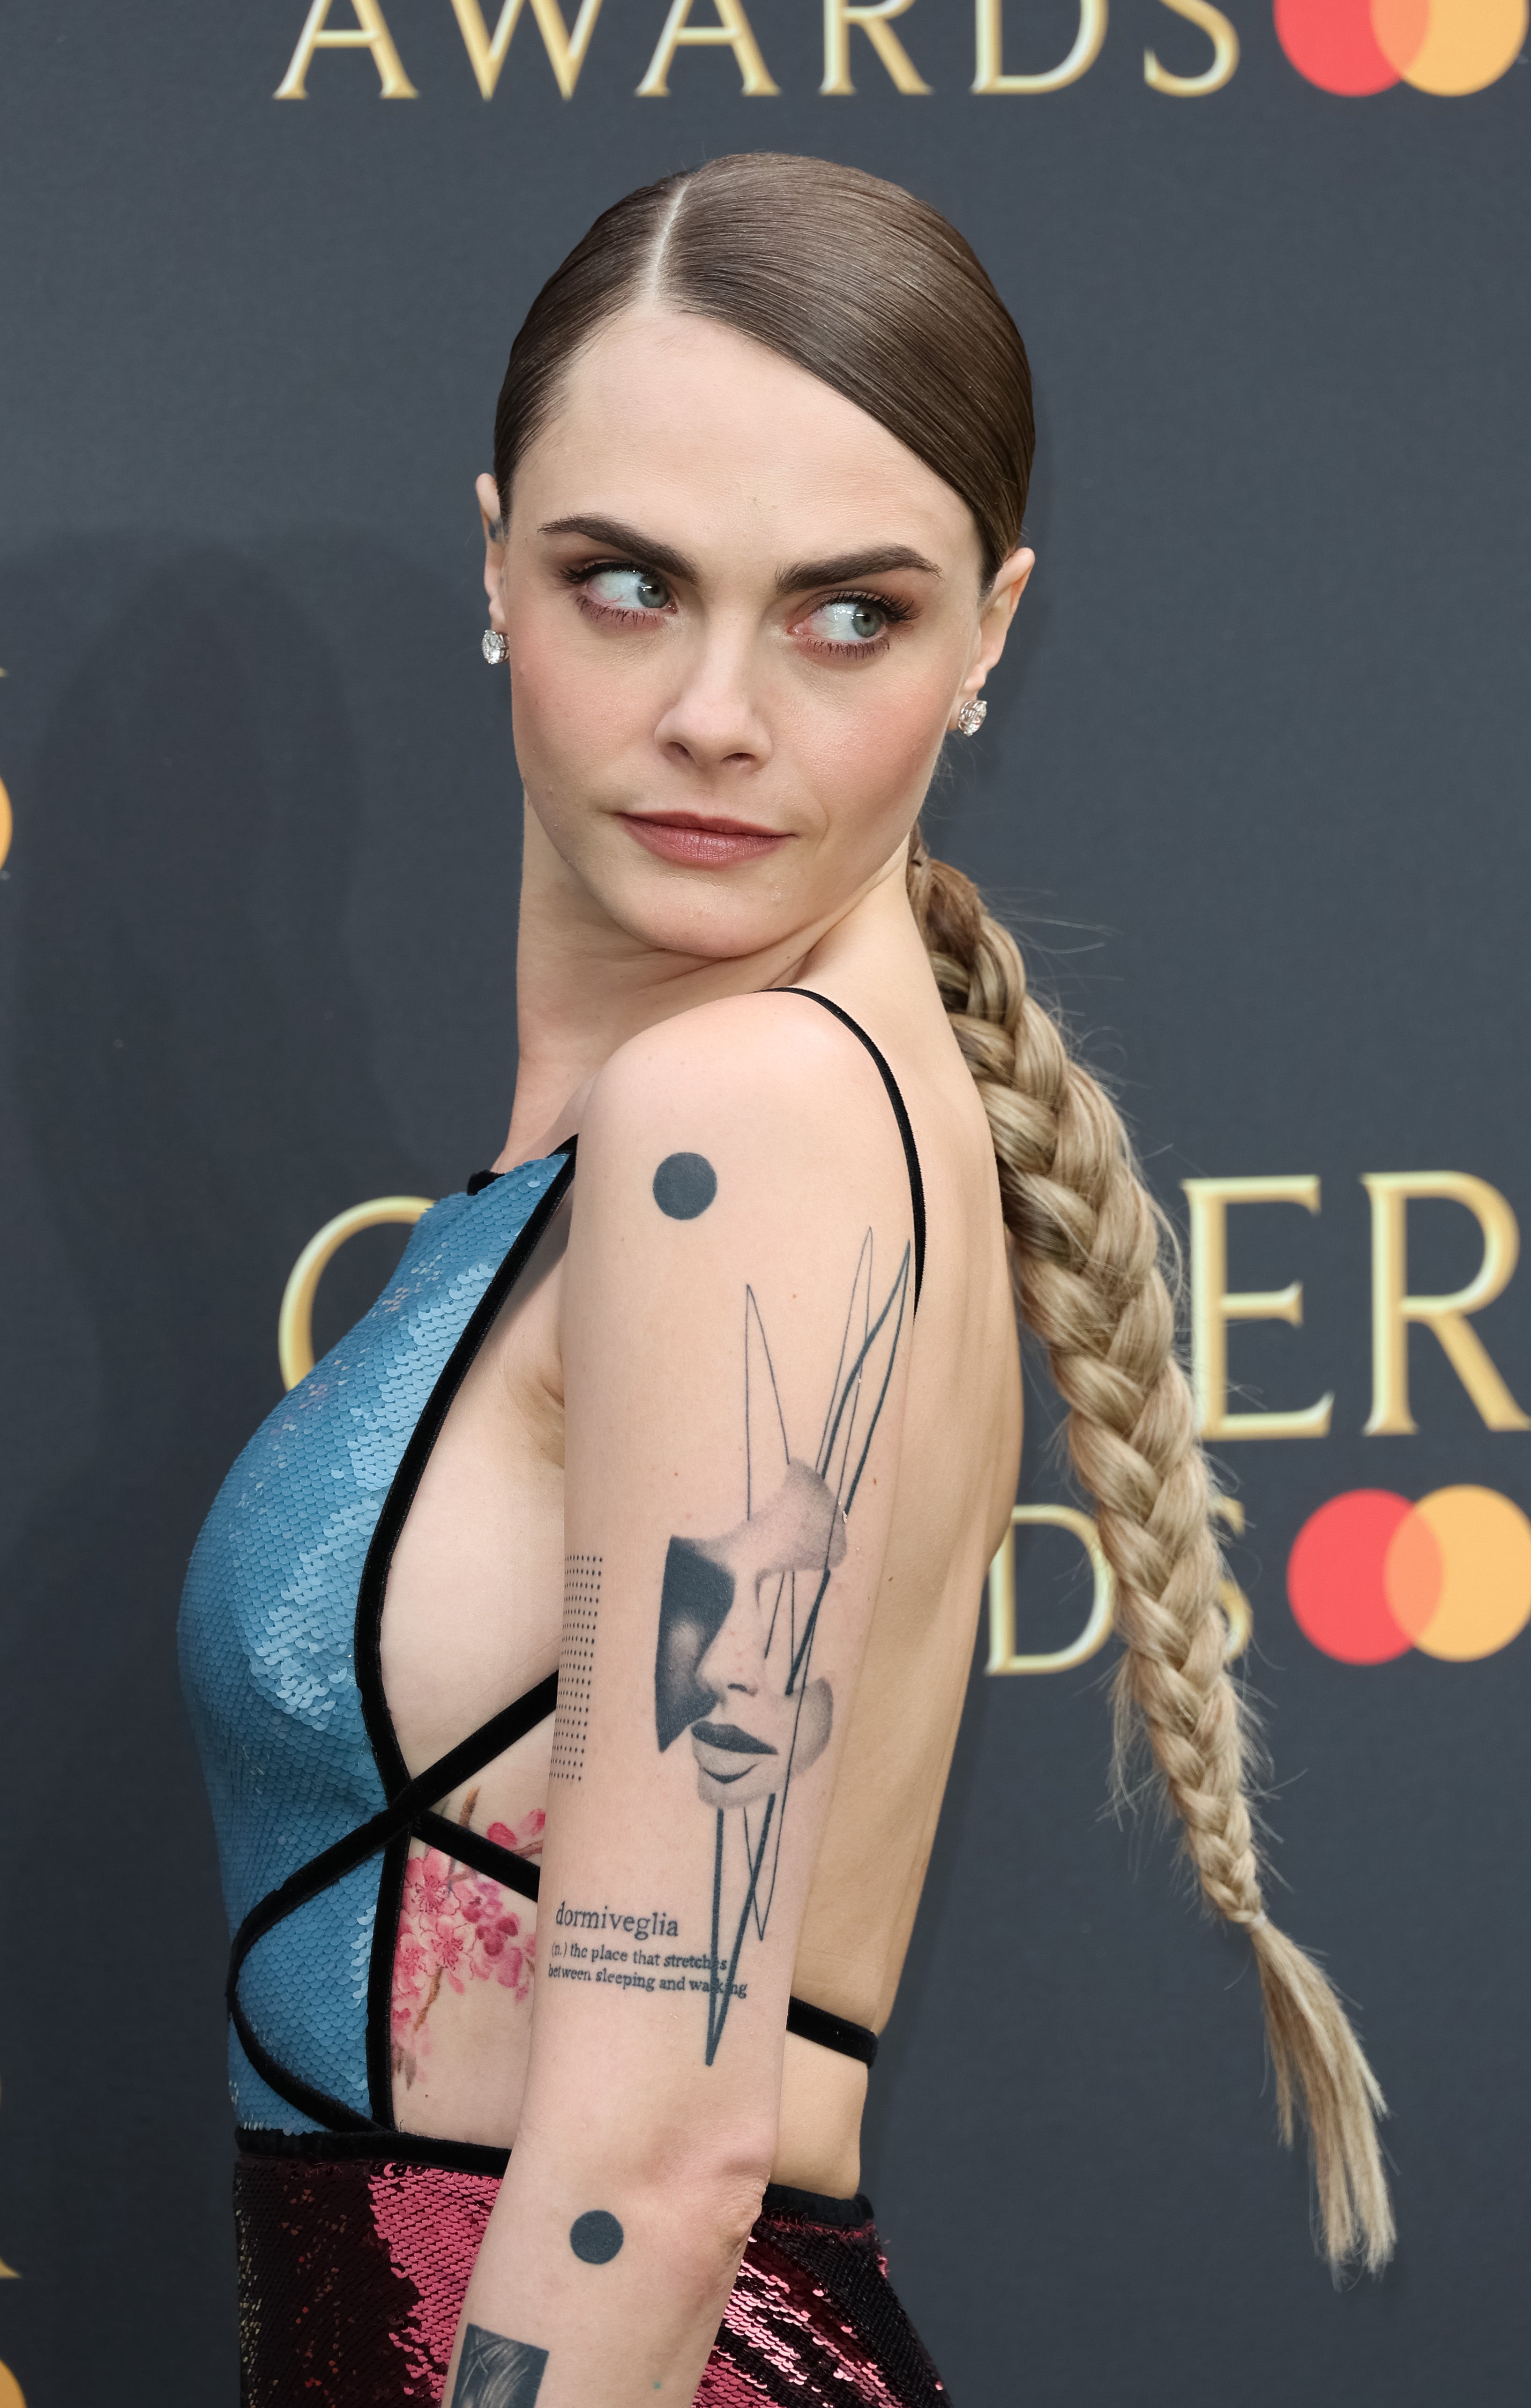 Delevingne appears to have added a thicker line to an existing tattoo above to cover up the typo in ‘walking’